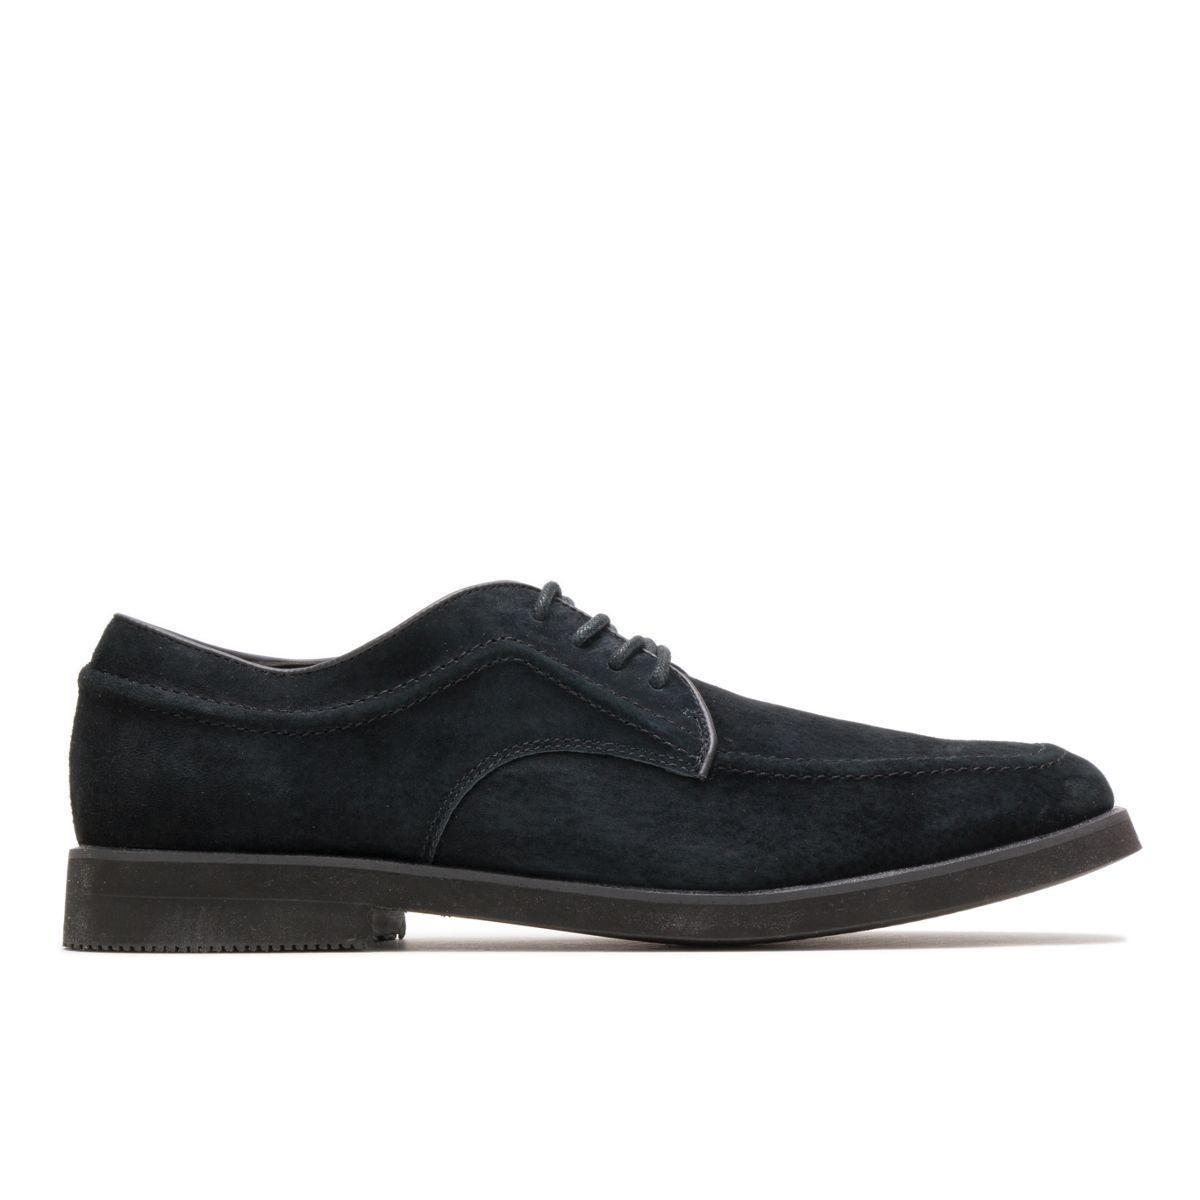 hush puppies shoes suede